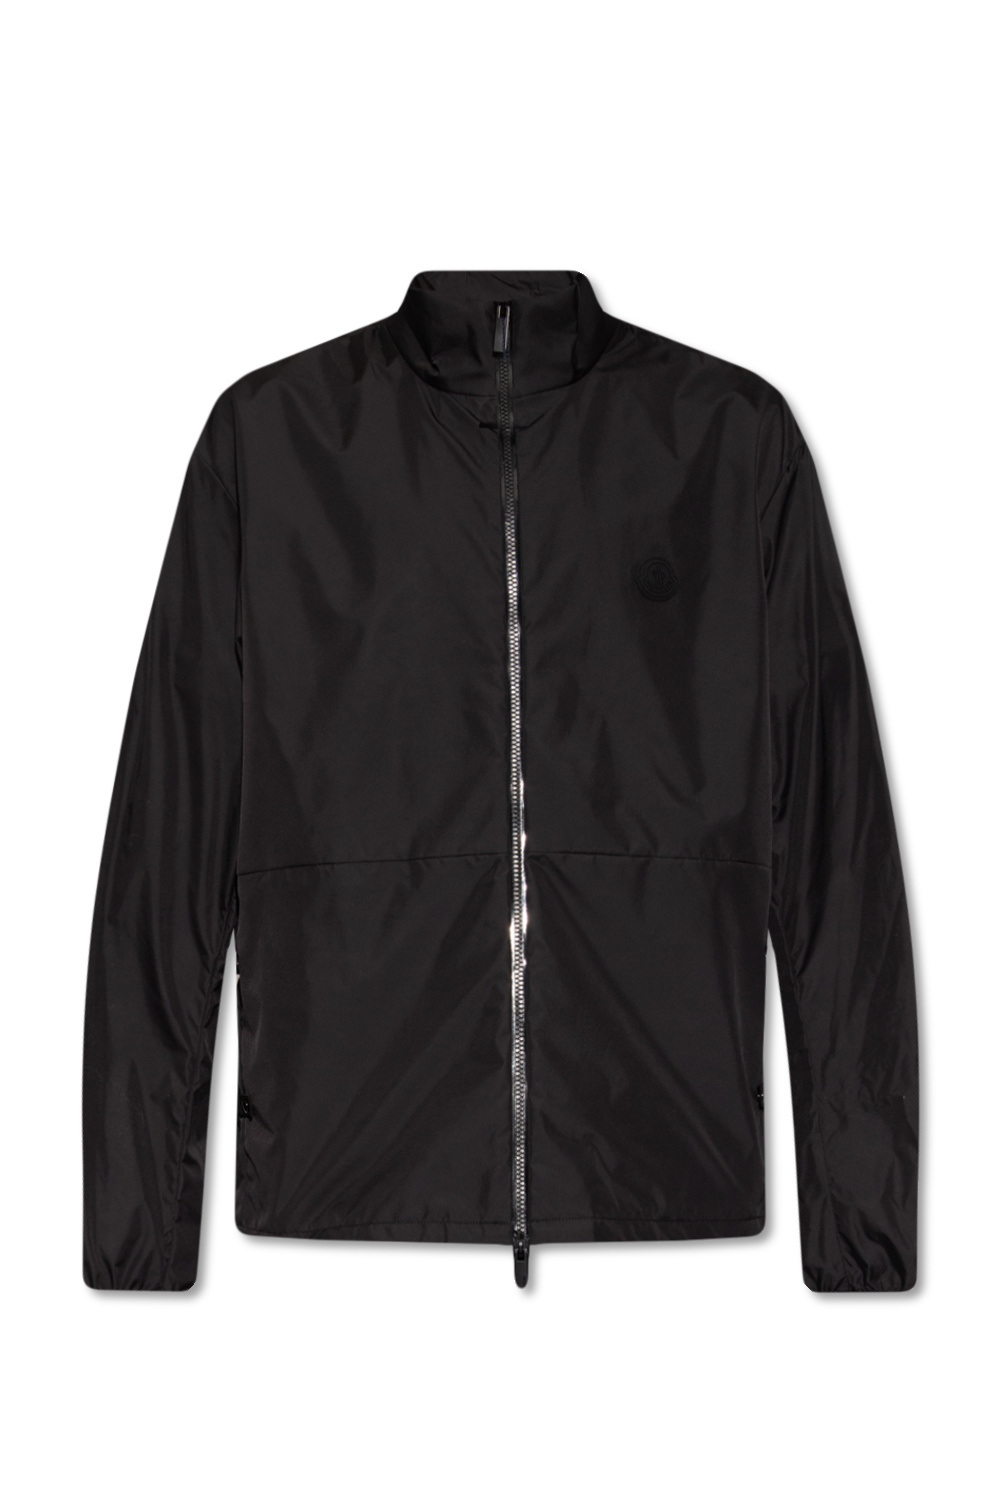 Moncler ‘Gennai’ jacket with stand-up collar